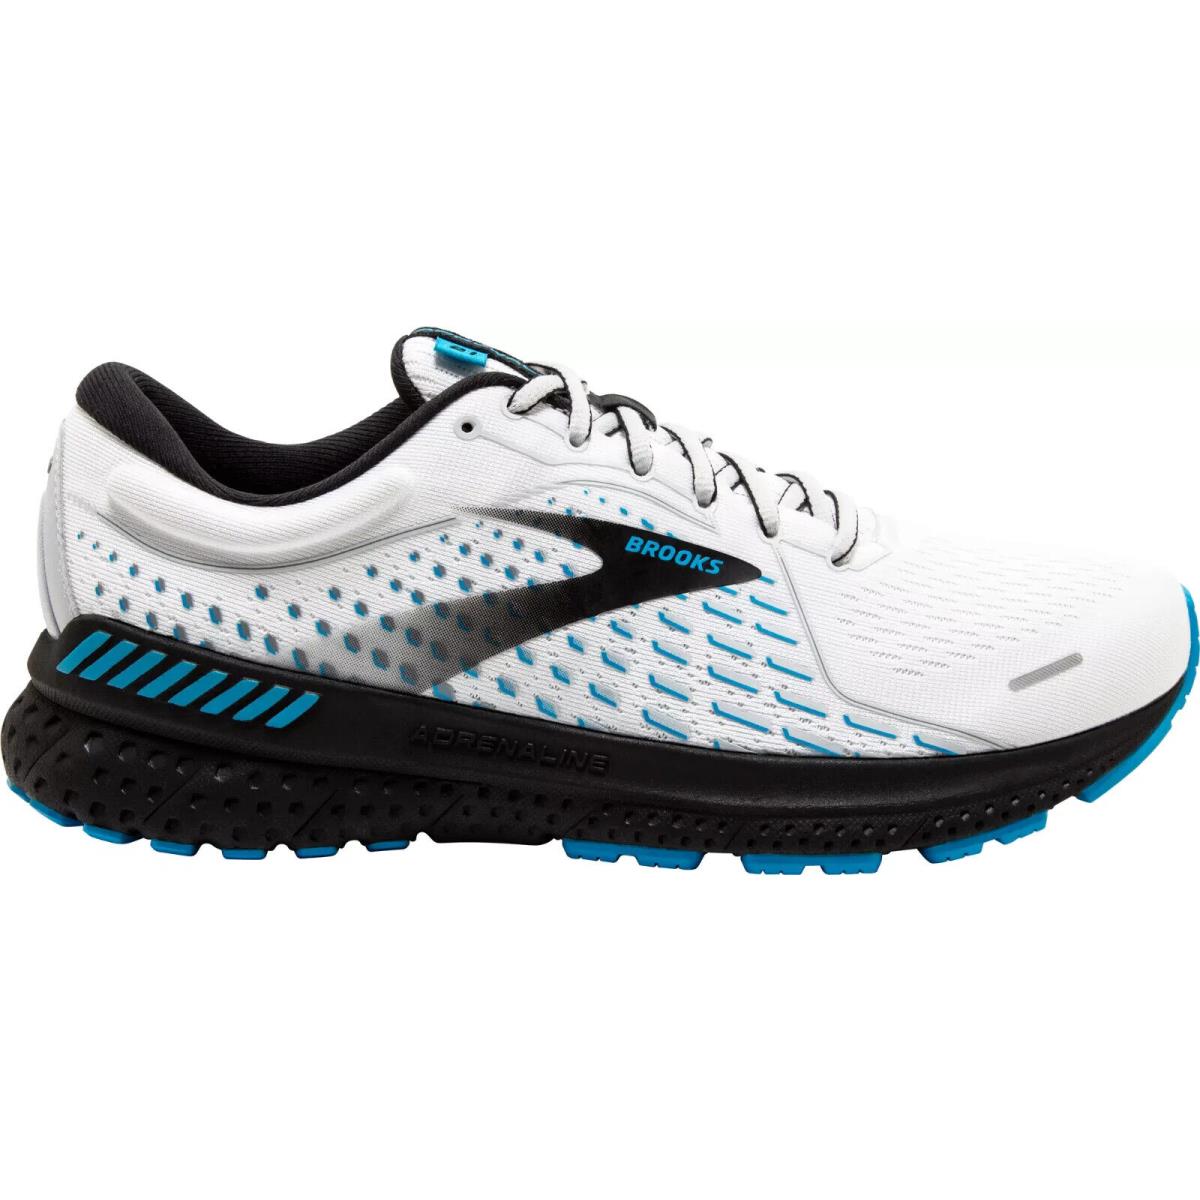 Brooks Adrenaline Gts 21 Men`s Running Shoes All Colors US Sizes 7-14 White/Grey/Atomic Blue